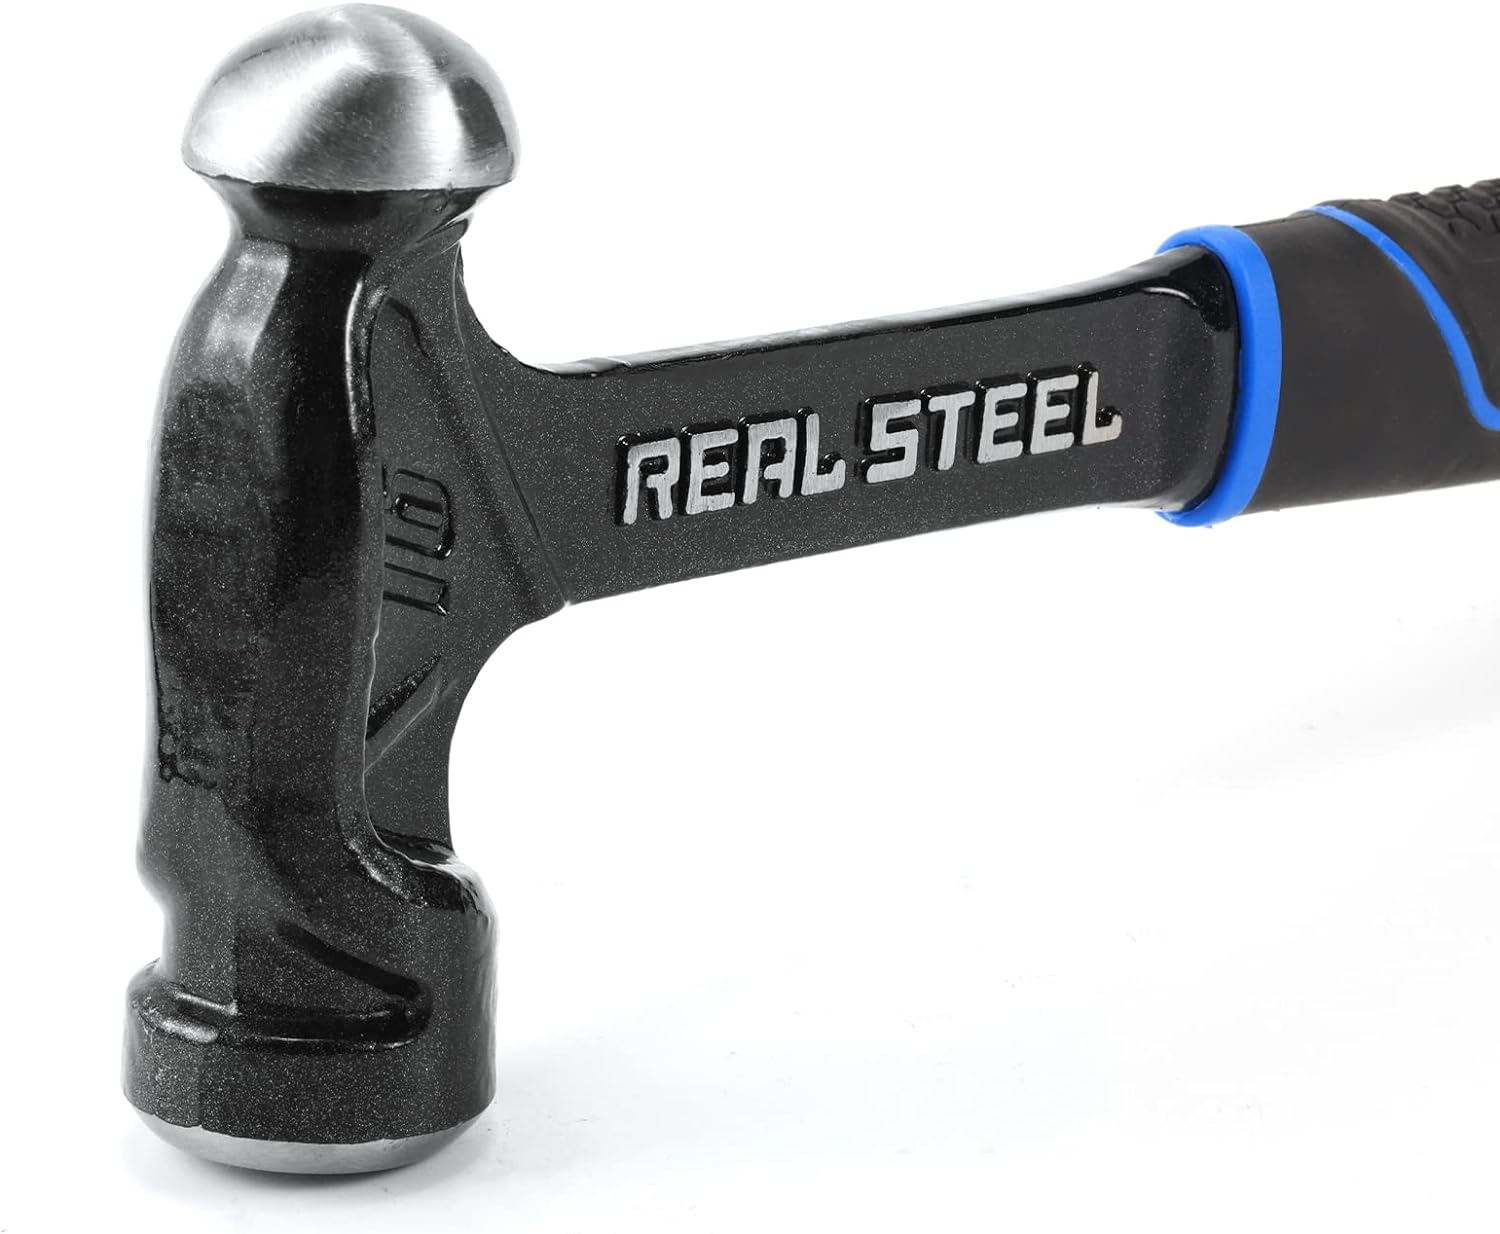 Real Steel Hammer Ball Pein 450g 16oz Ultra Steel Handle Real Steel RSH0518 Power Tool Services